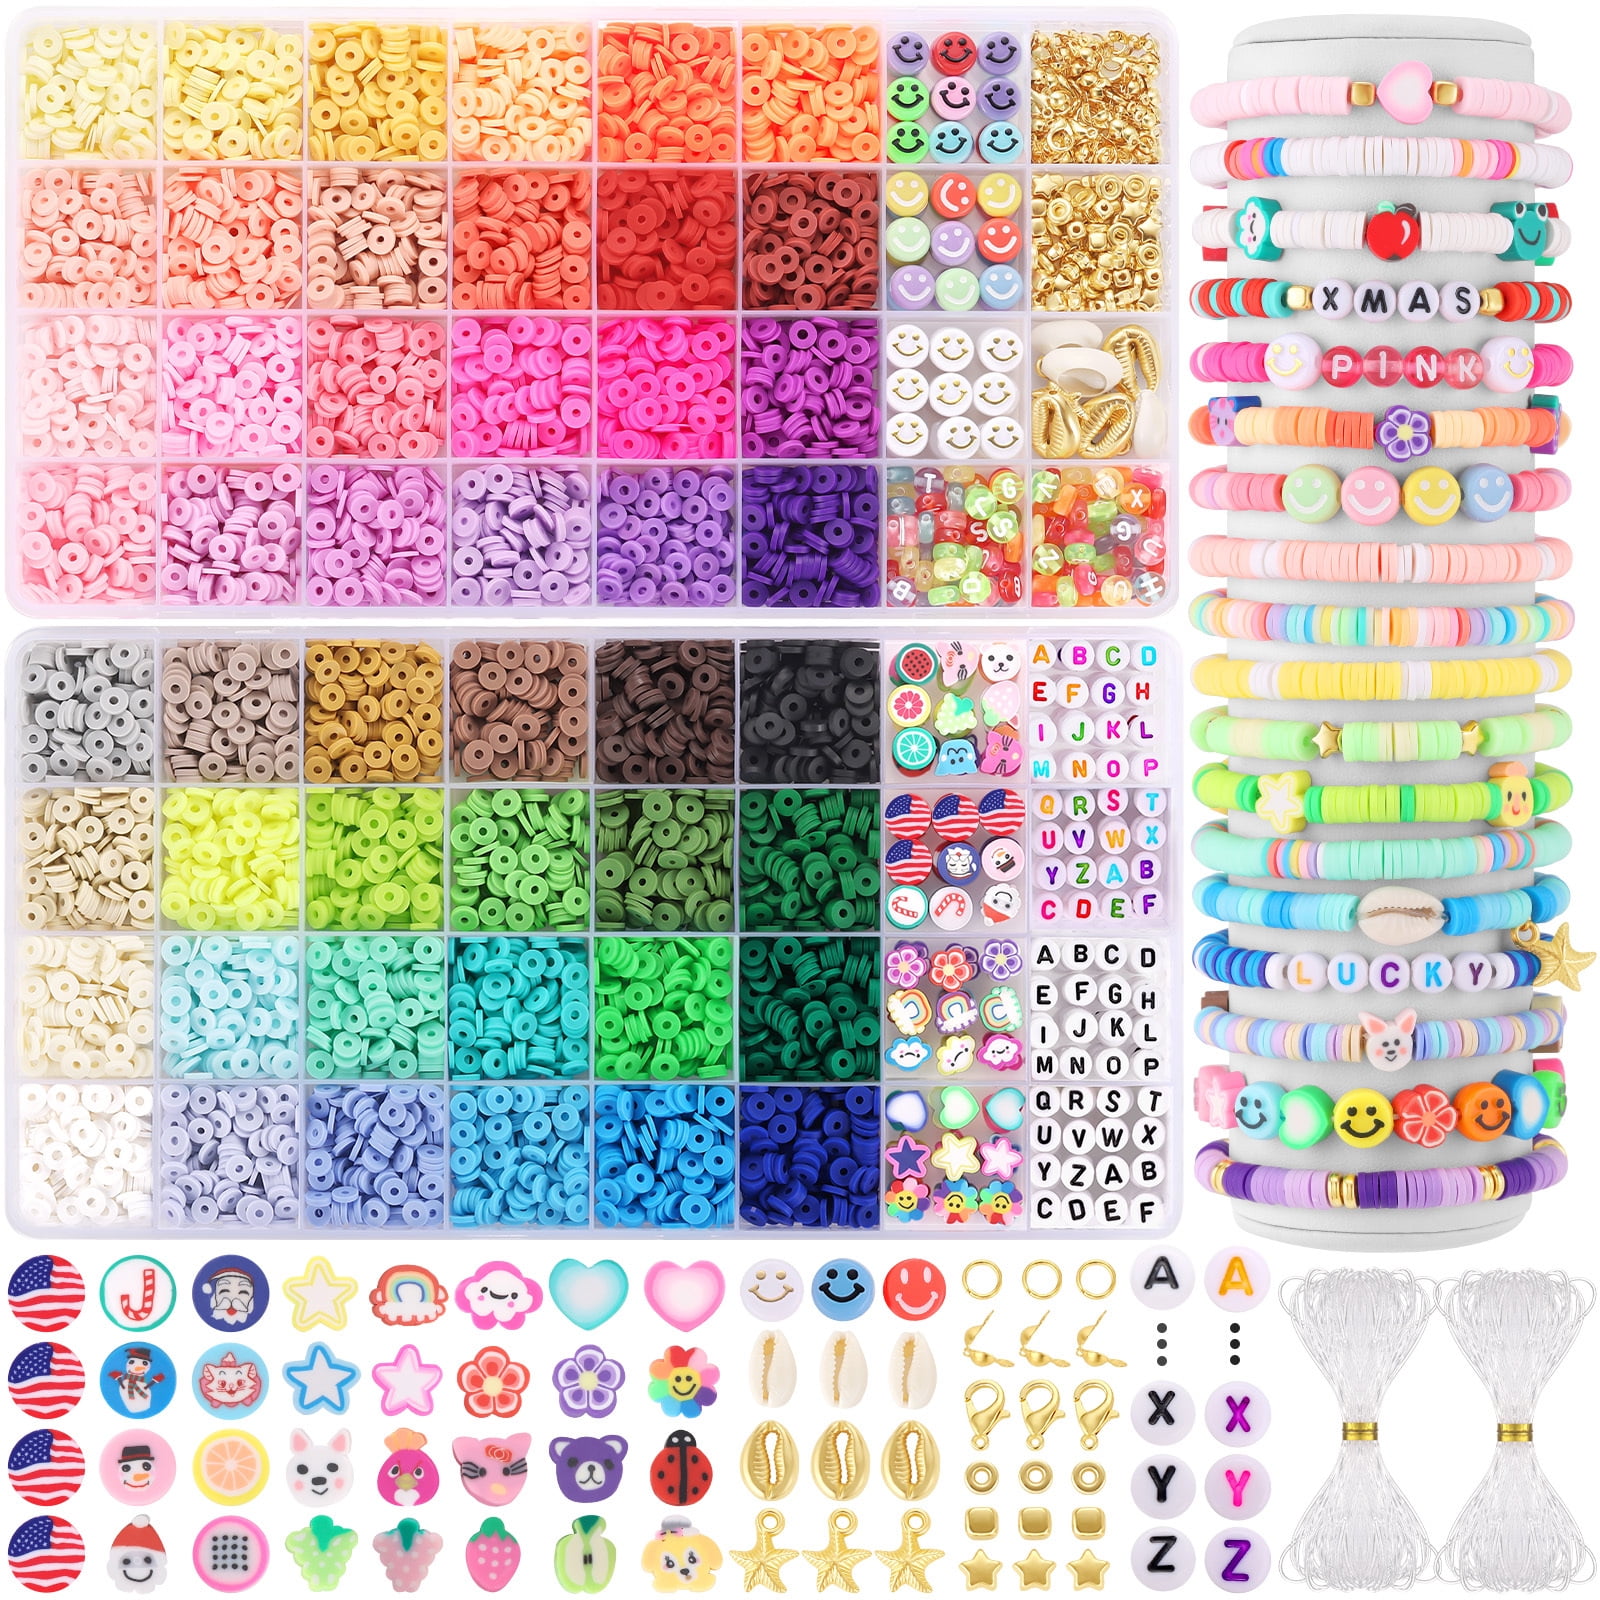  Velavior Clay Beads Bracelet Making Kit, 28 Colors Friendship  Bracelets Polymer Heishi Beads Jewelry Making Kits with Charms Strings  Crafts Gifts Toys Set for Kids Teen Girls : Arts, Crafts 